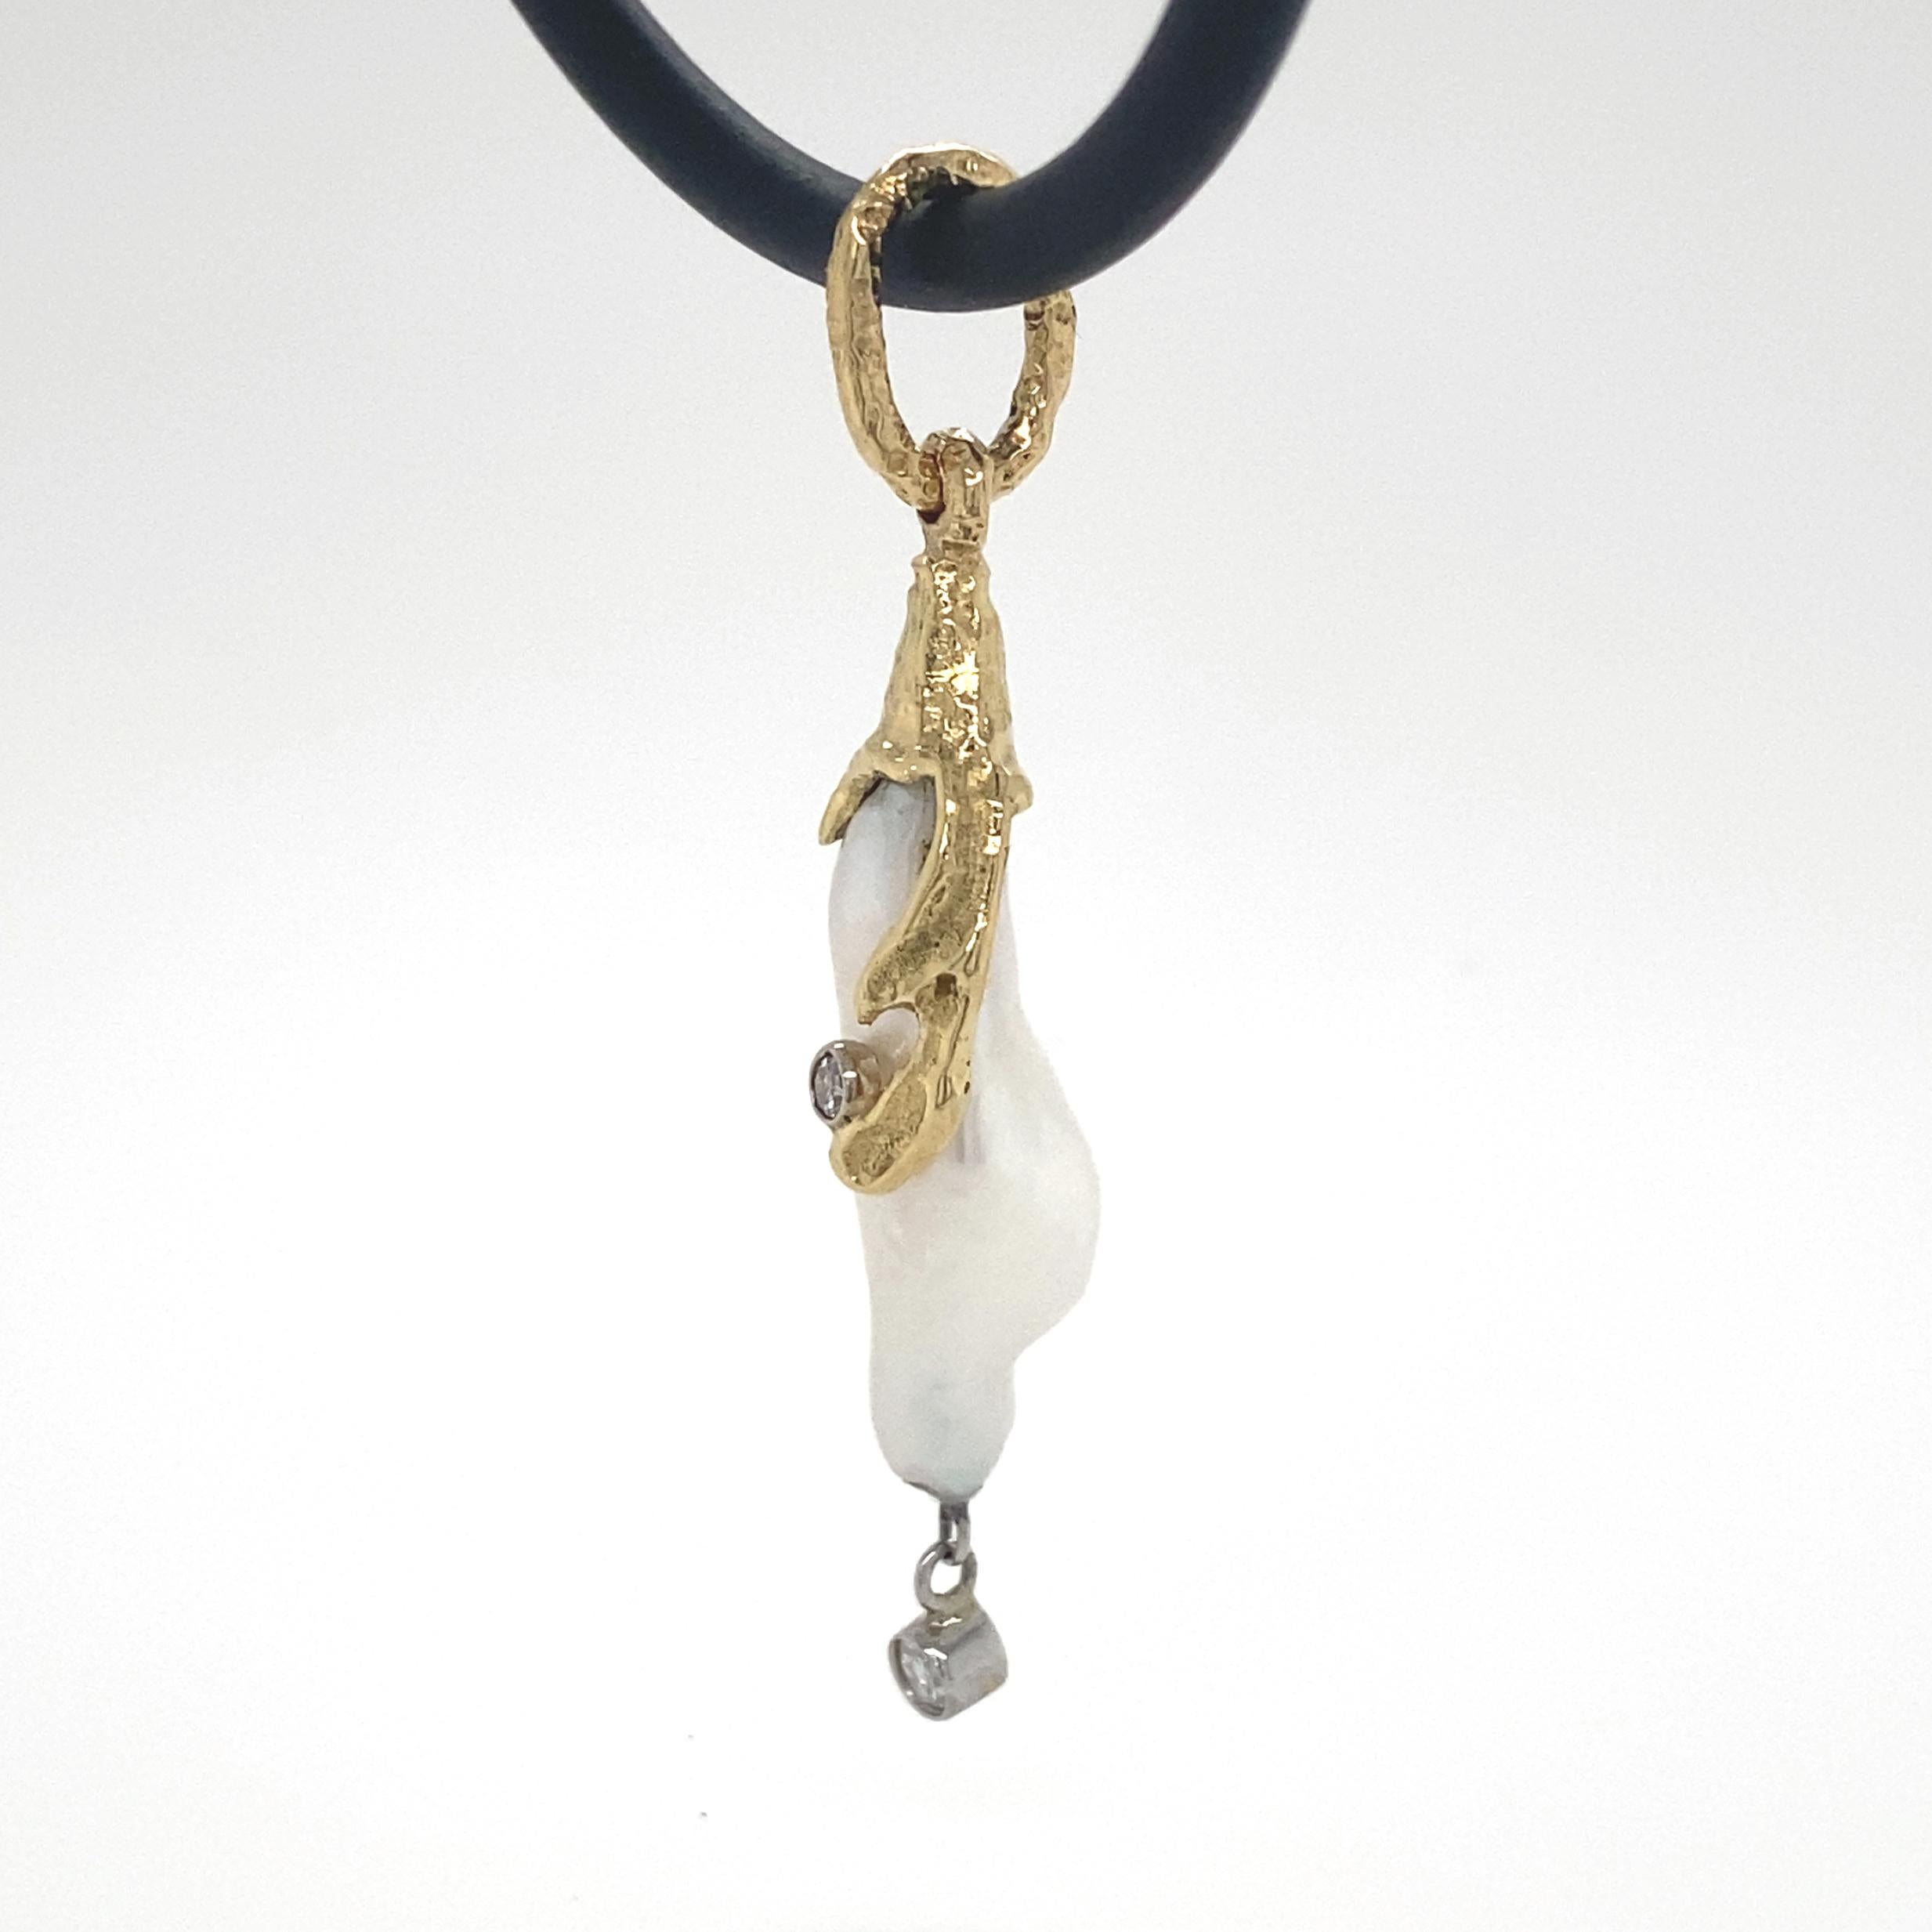 This adorable, one-of-kind pendant, with its funny little bulging behind and peek-a-boo curl, reminds us of the 1920's flapper cartoon character Betty Boop.  Eytan Brandes made it on a whim, spotting the pearl in a pile of baroques we were sorting